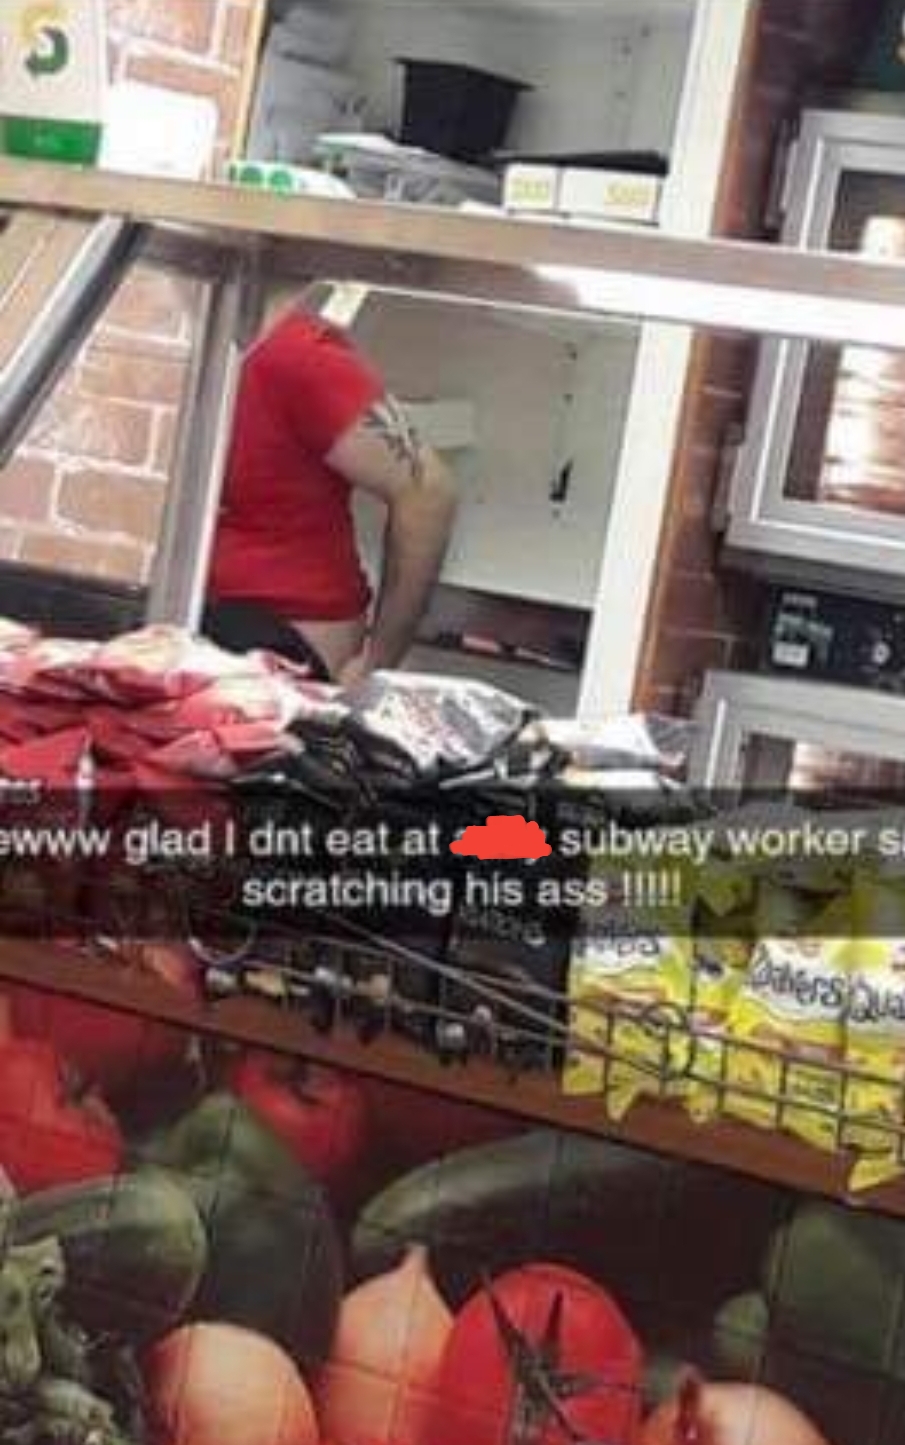 supermarket - www glad I dnt eat at subway workers scratching his ass !!!!! Duos des